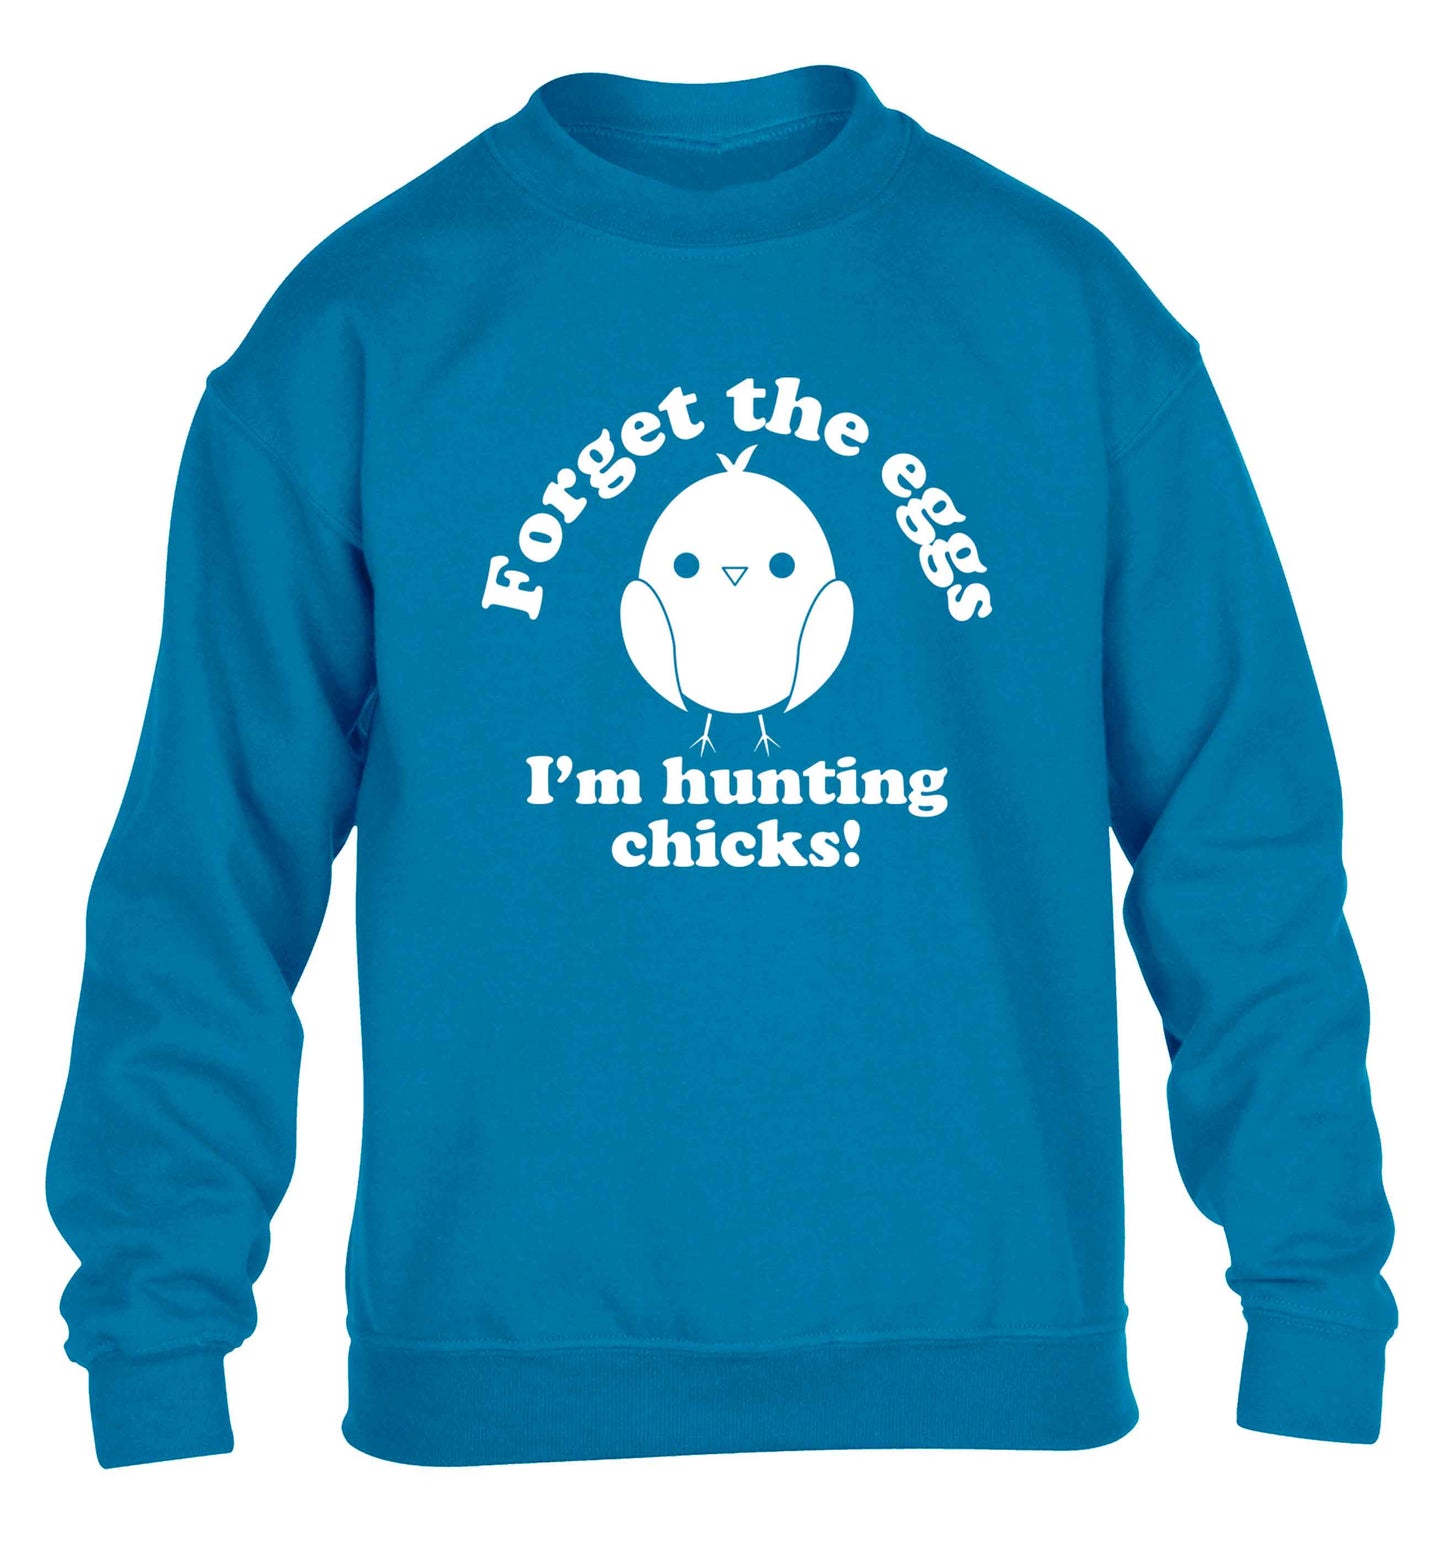 Forget the eggs I'm hunting chicks! children's blue sweater 12-13 Years